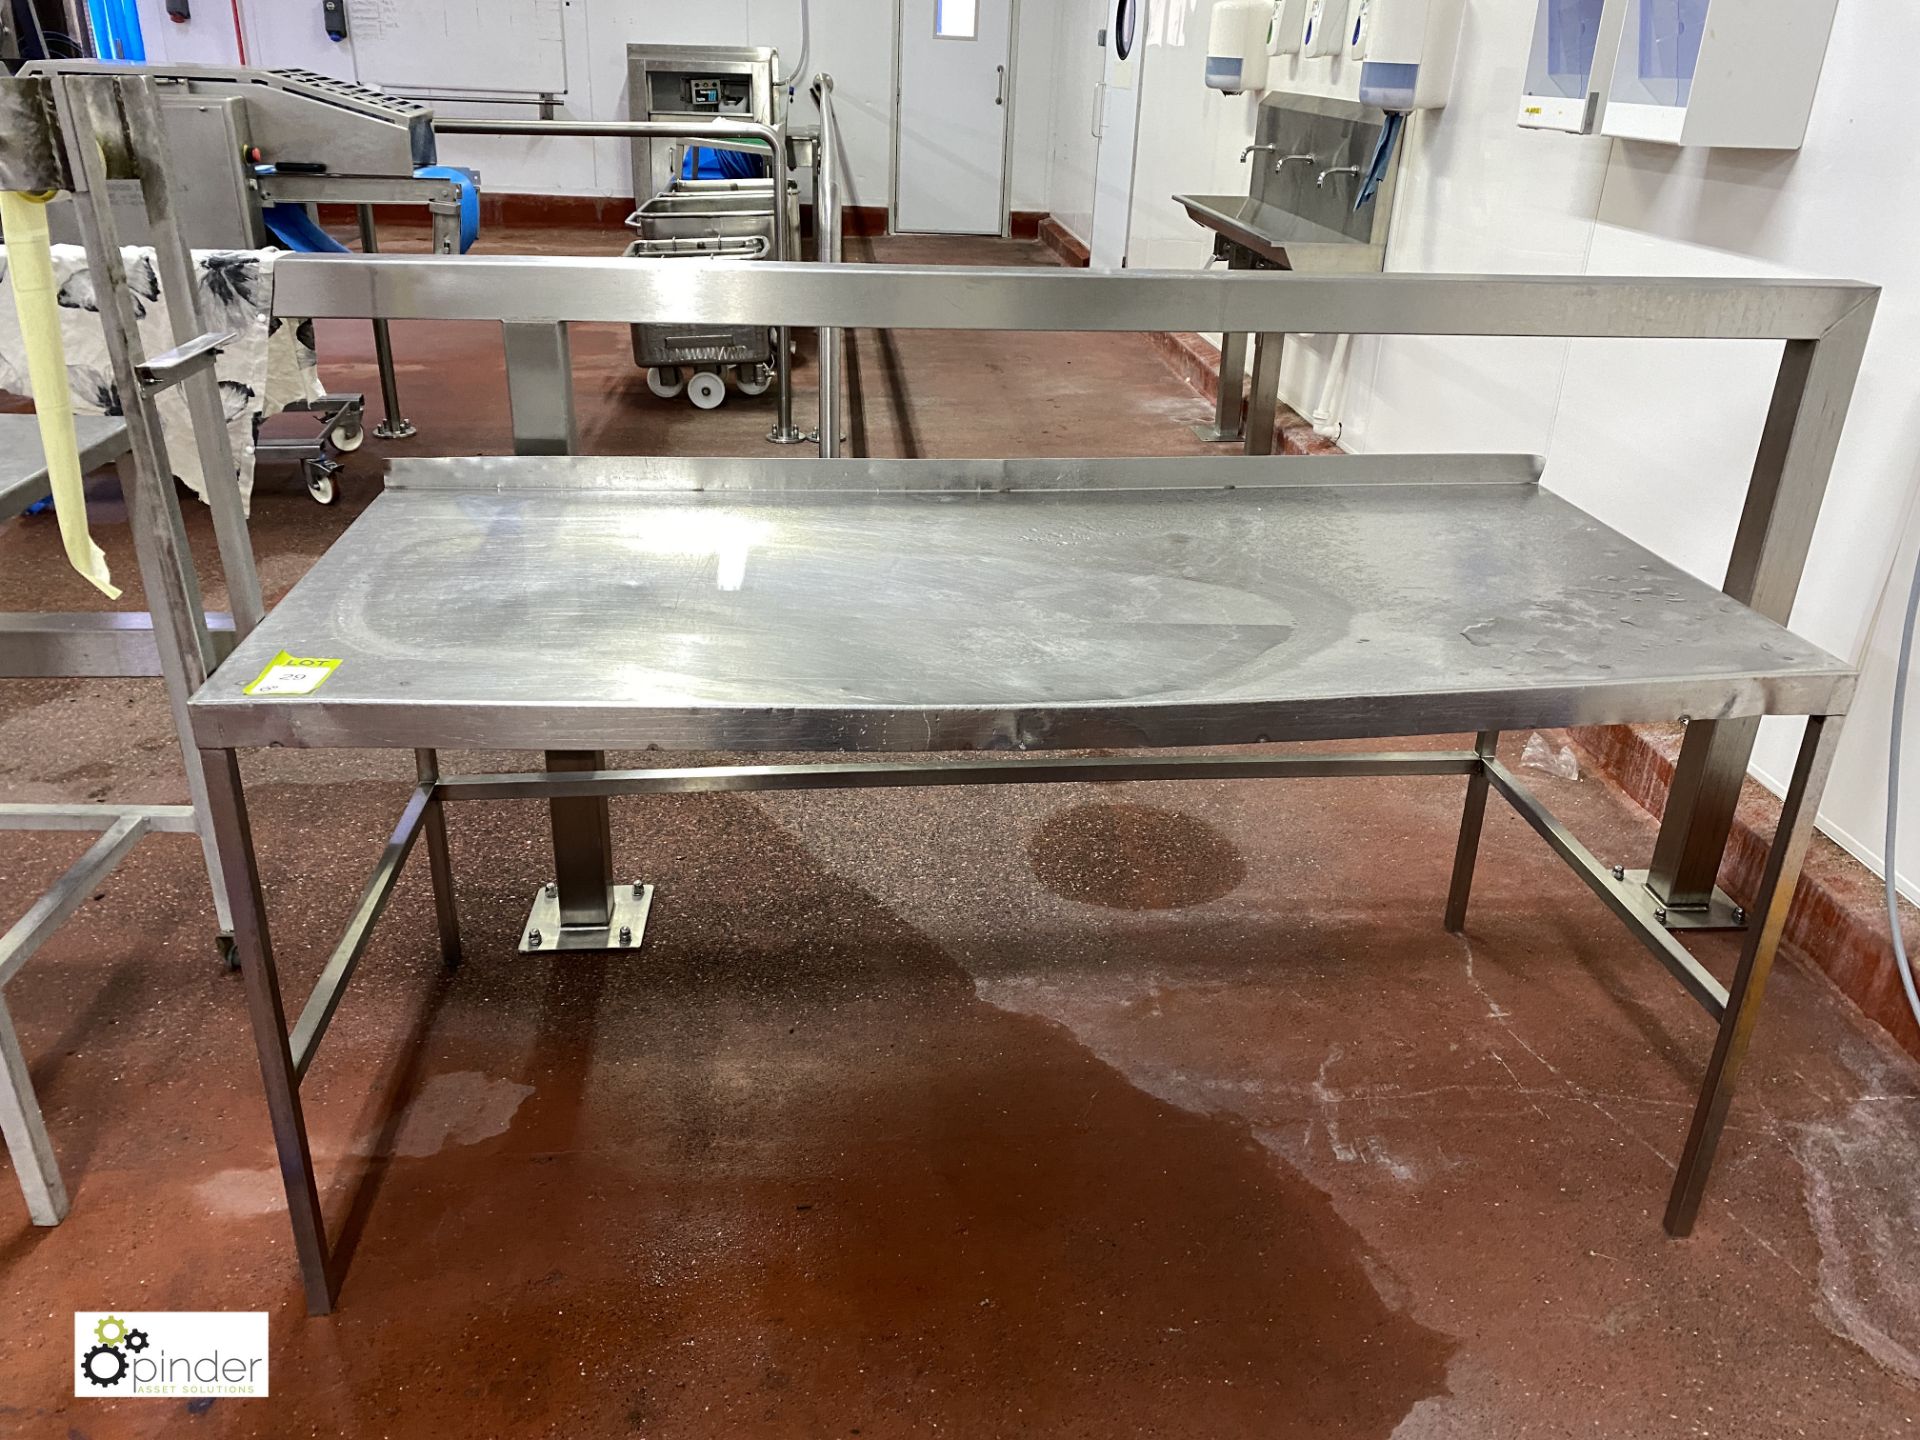 Stainless steel Preparation Table, 1730mm x 760mm x 800mm high (please note there is a lift out